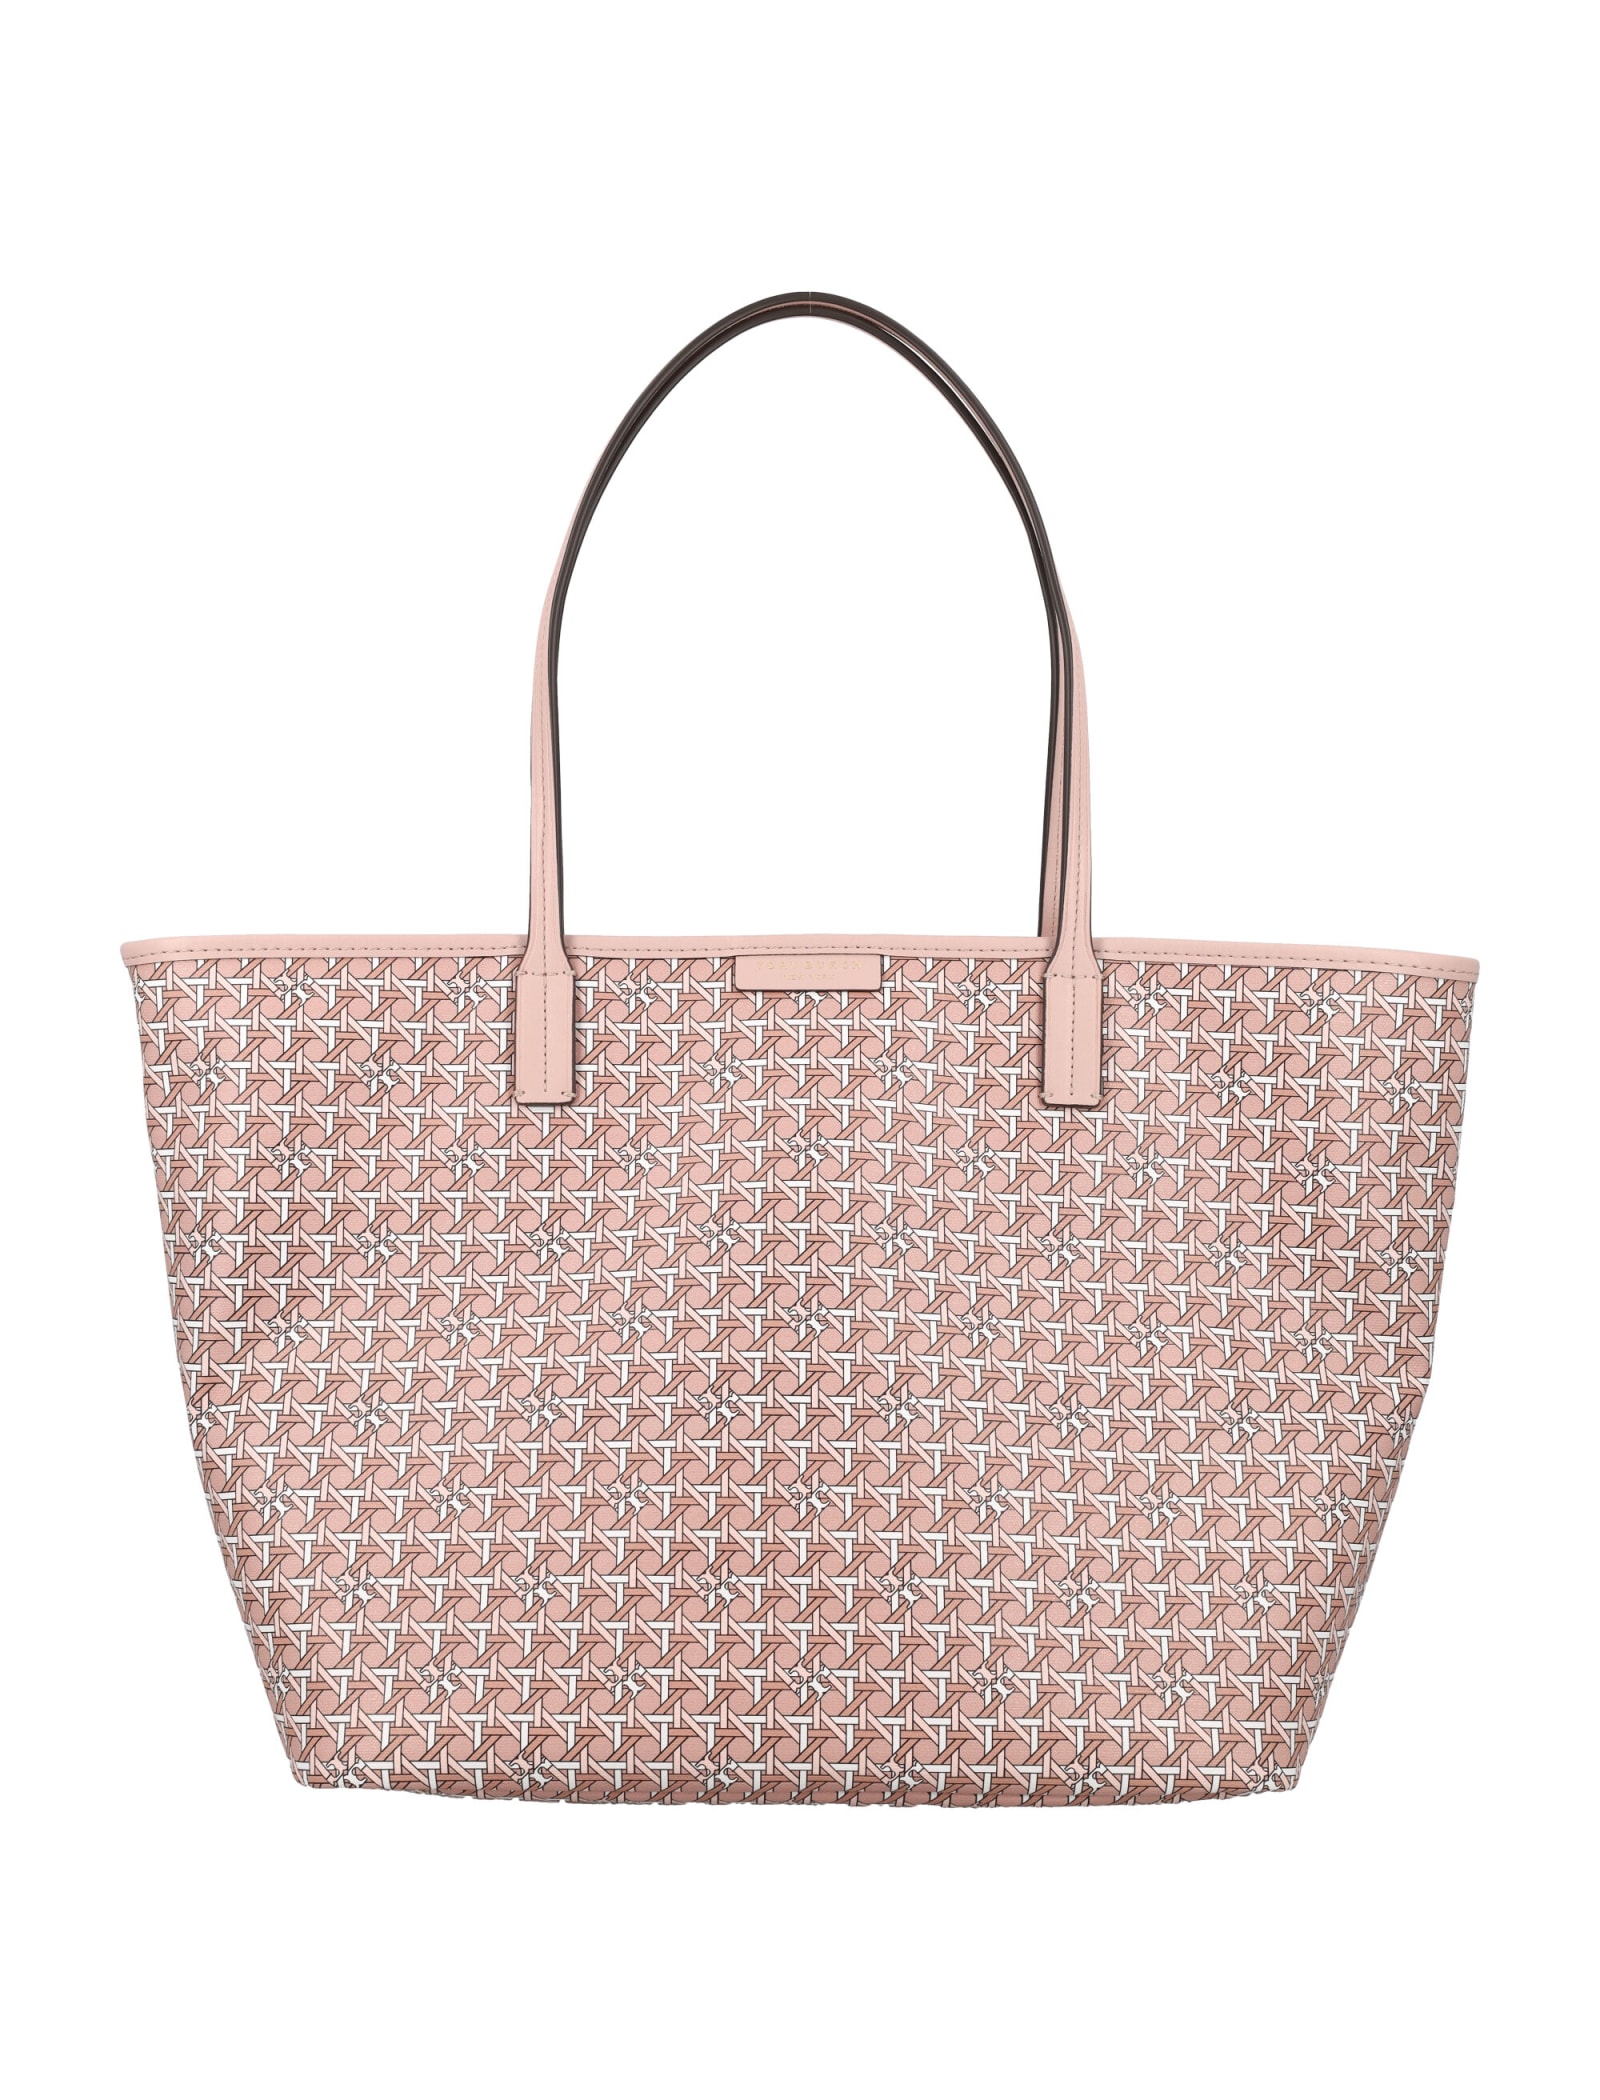 Ever-ready Tote